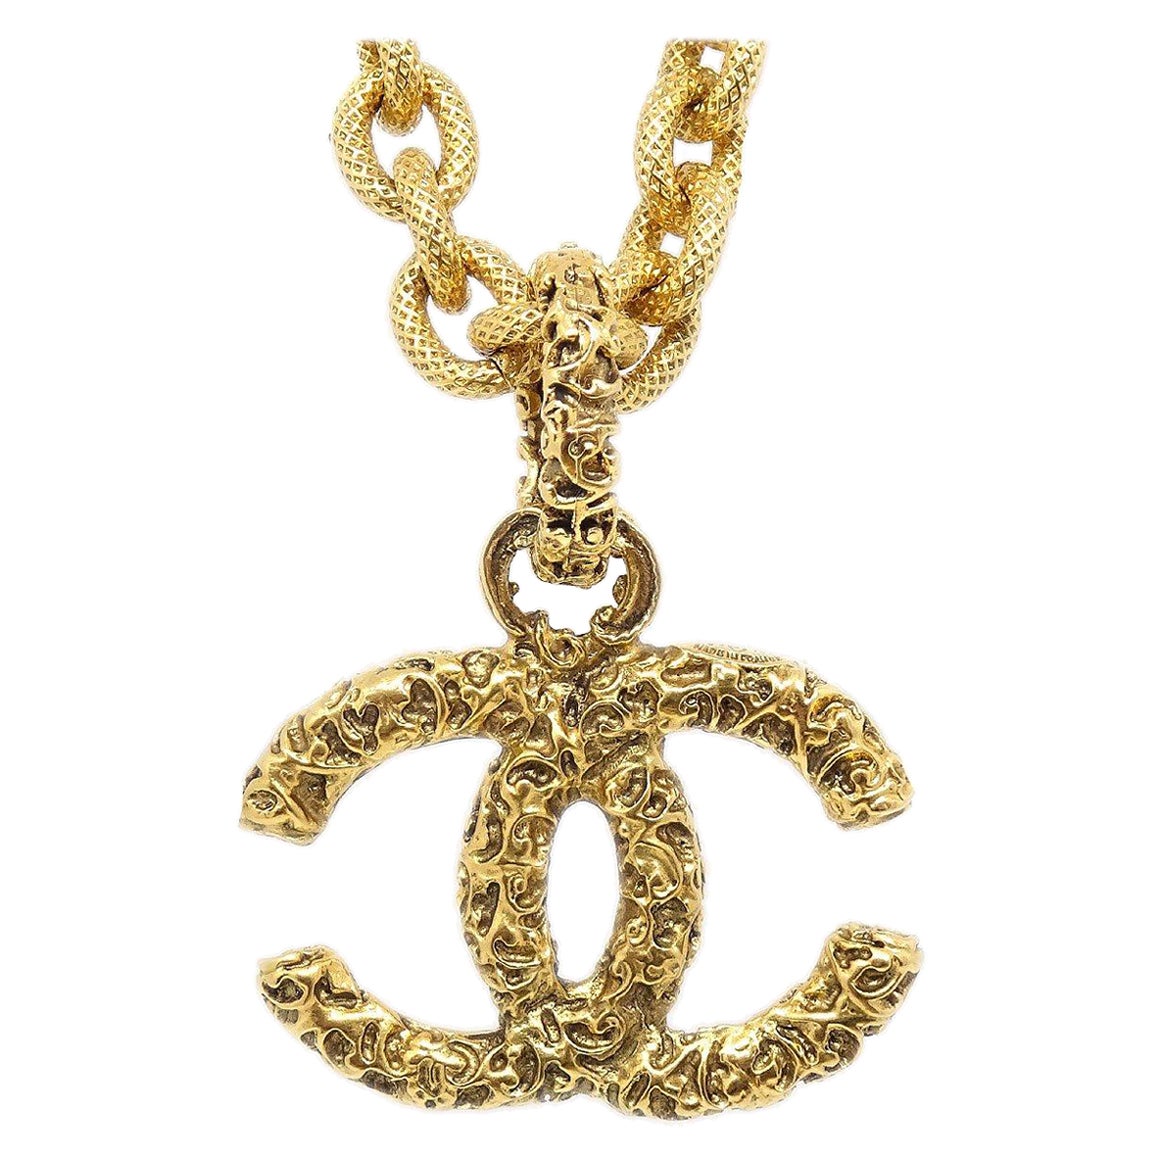 CHANEL CC Charm Textured God Metal Chain Link Necklace